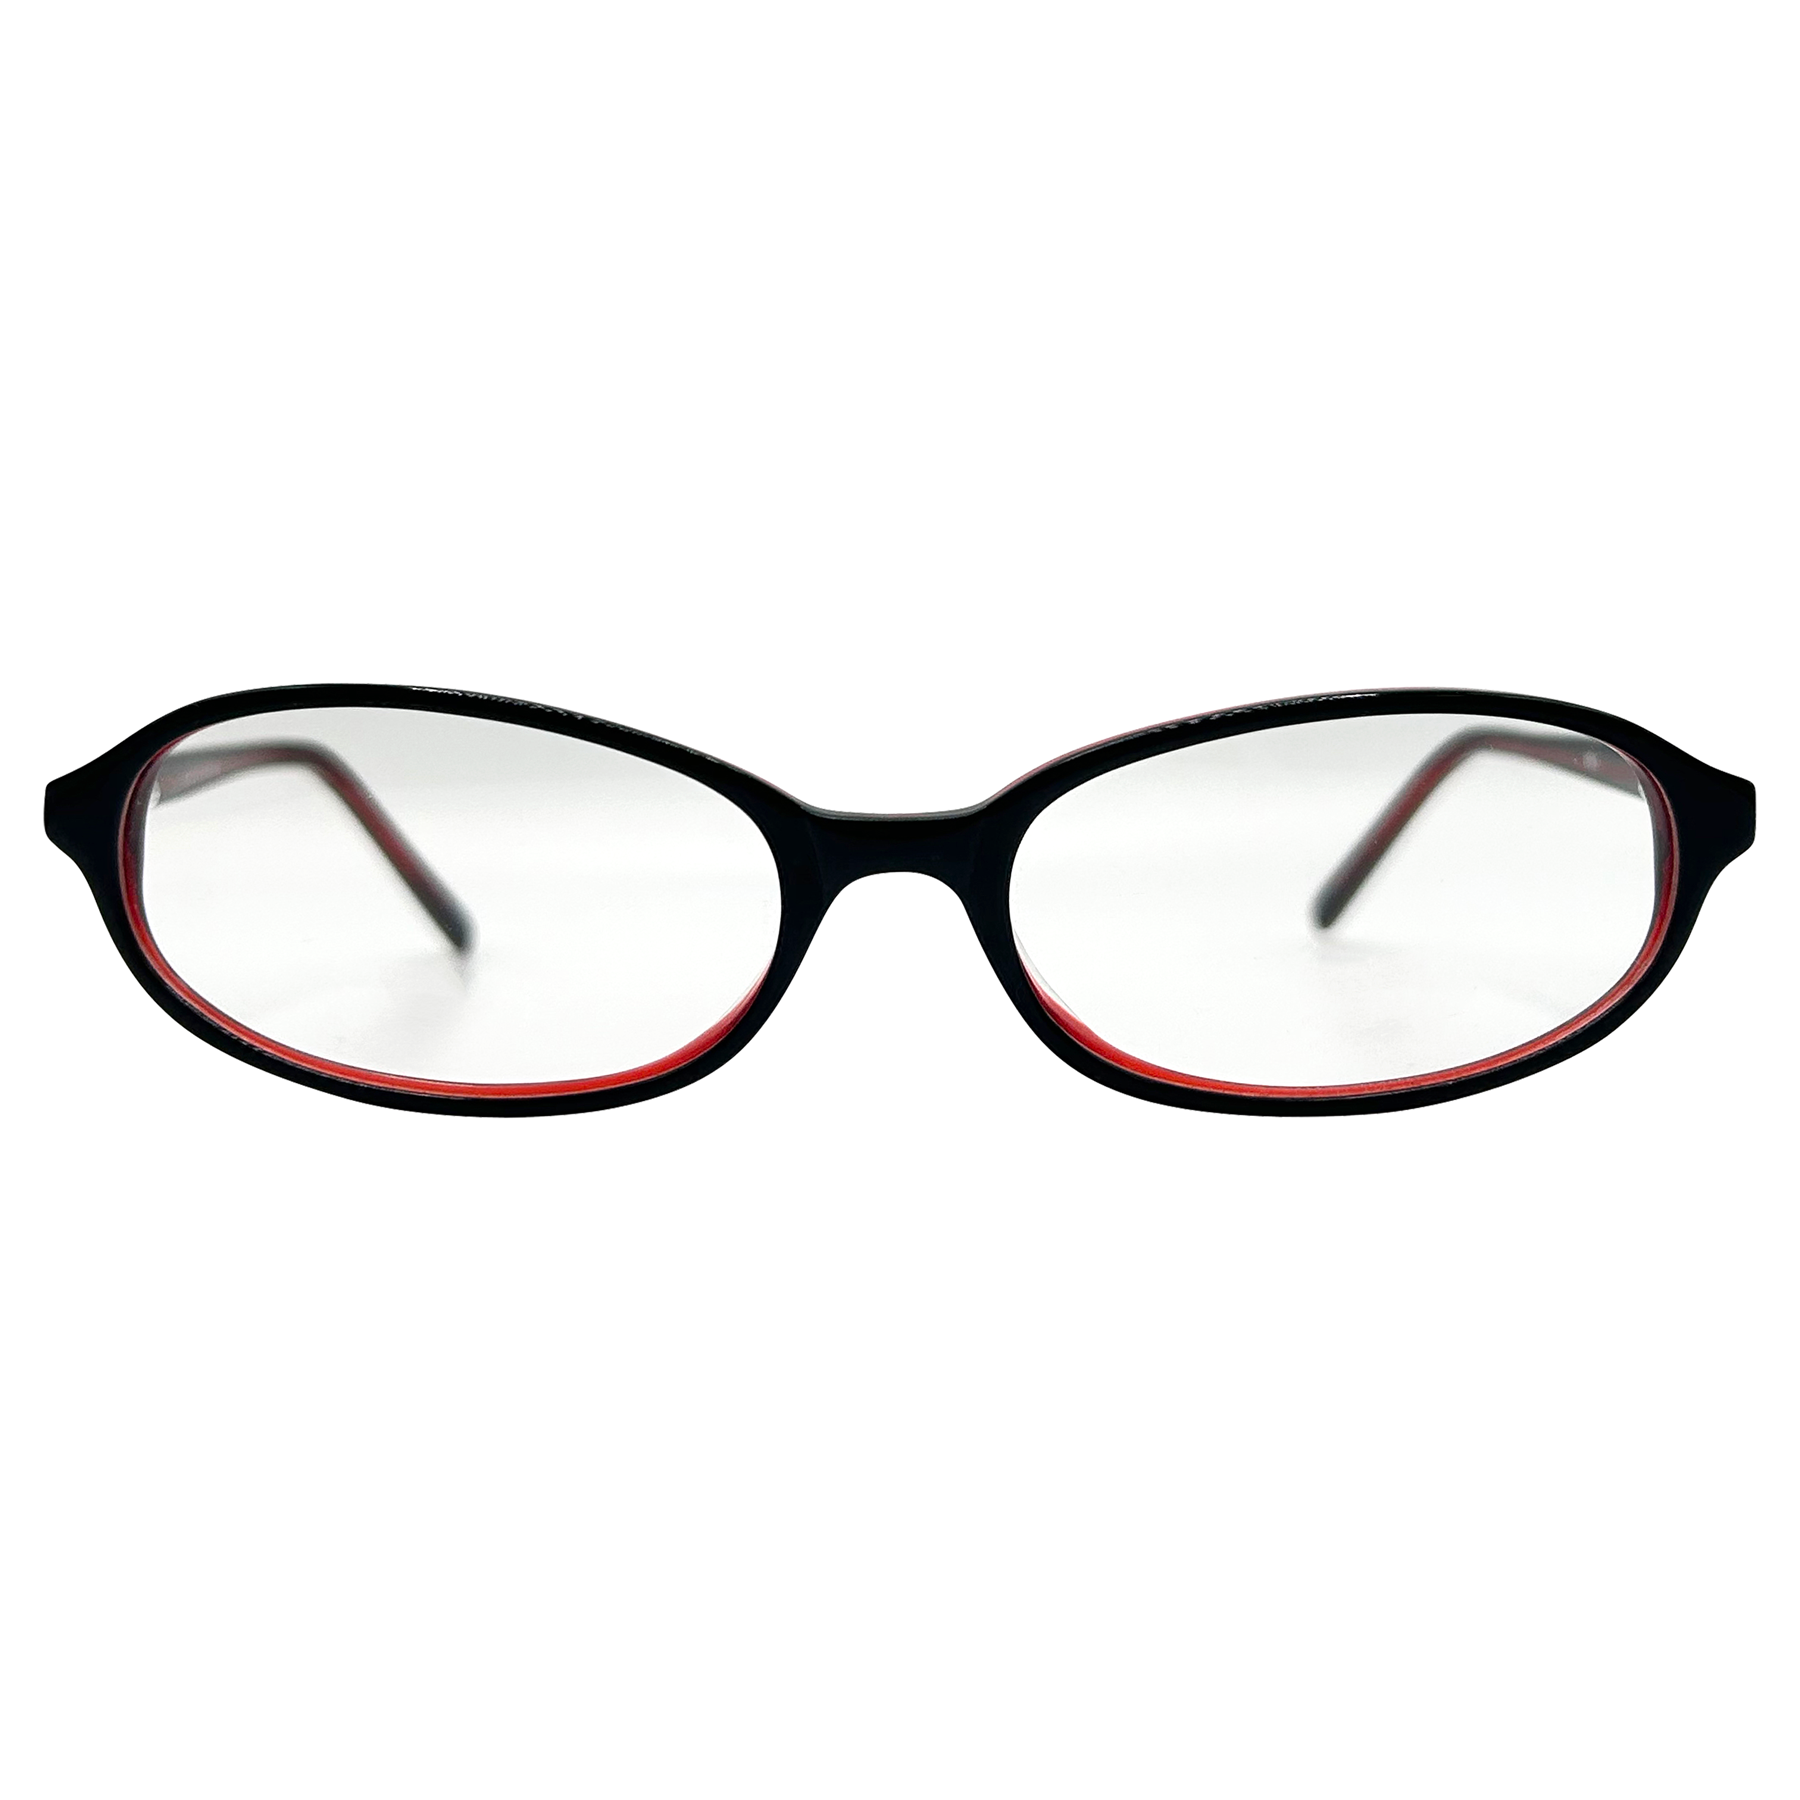 ITTY BITTY Small Clear Oval 90s Glasses | Premium